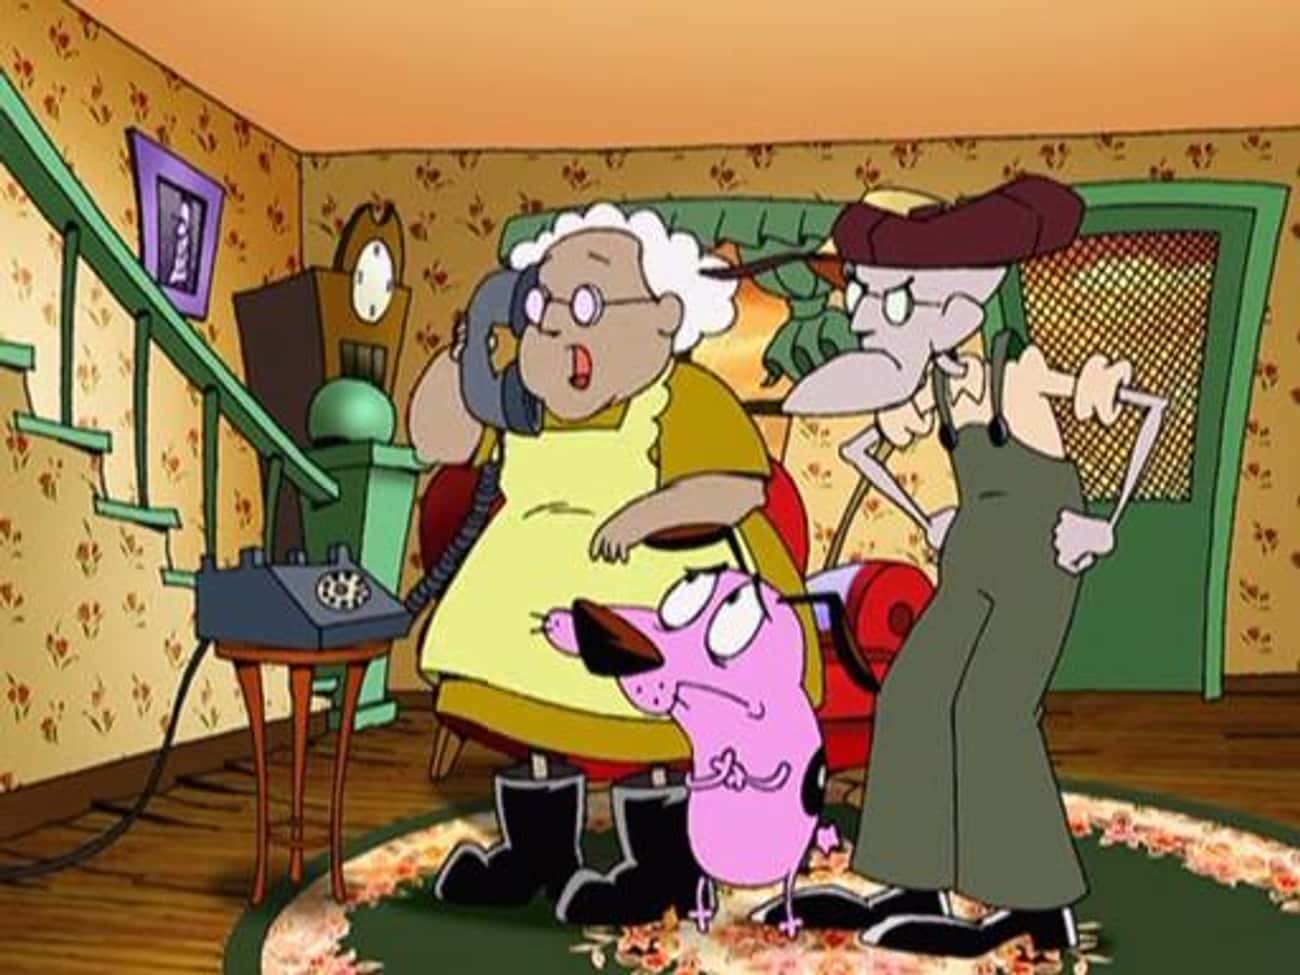 The Strange Events In 'Courage the Cowardly Dog' Are All Normal